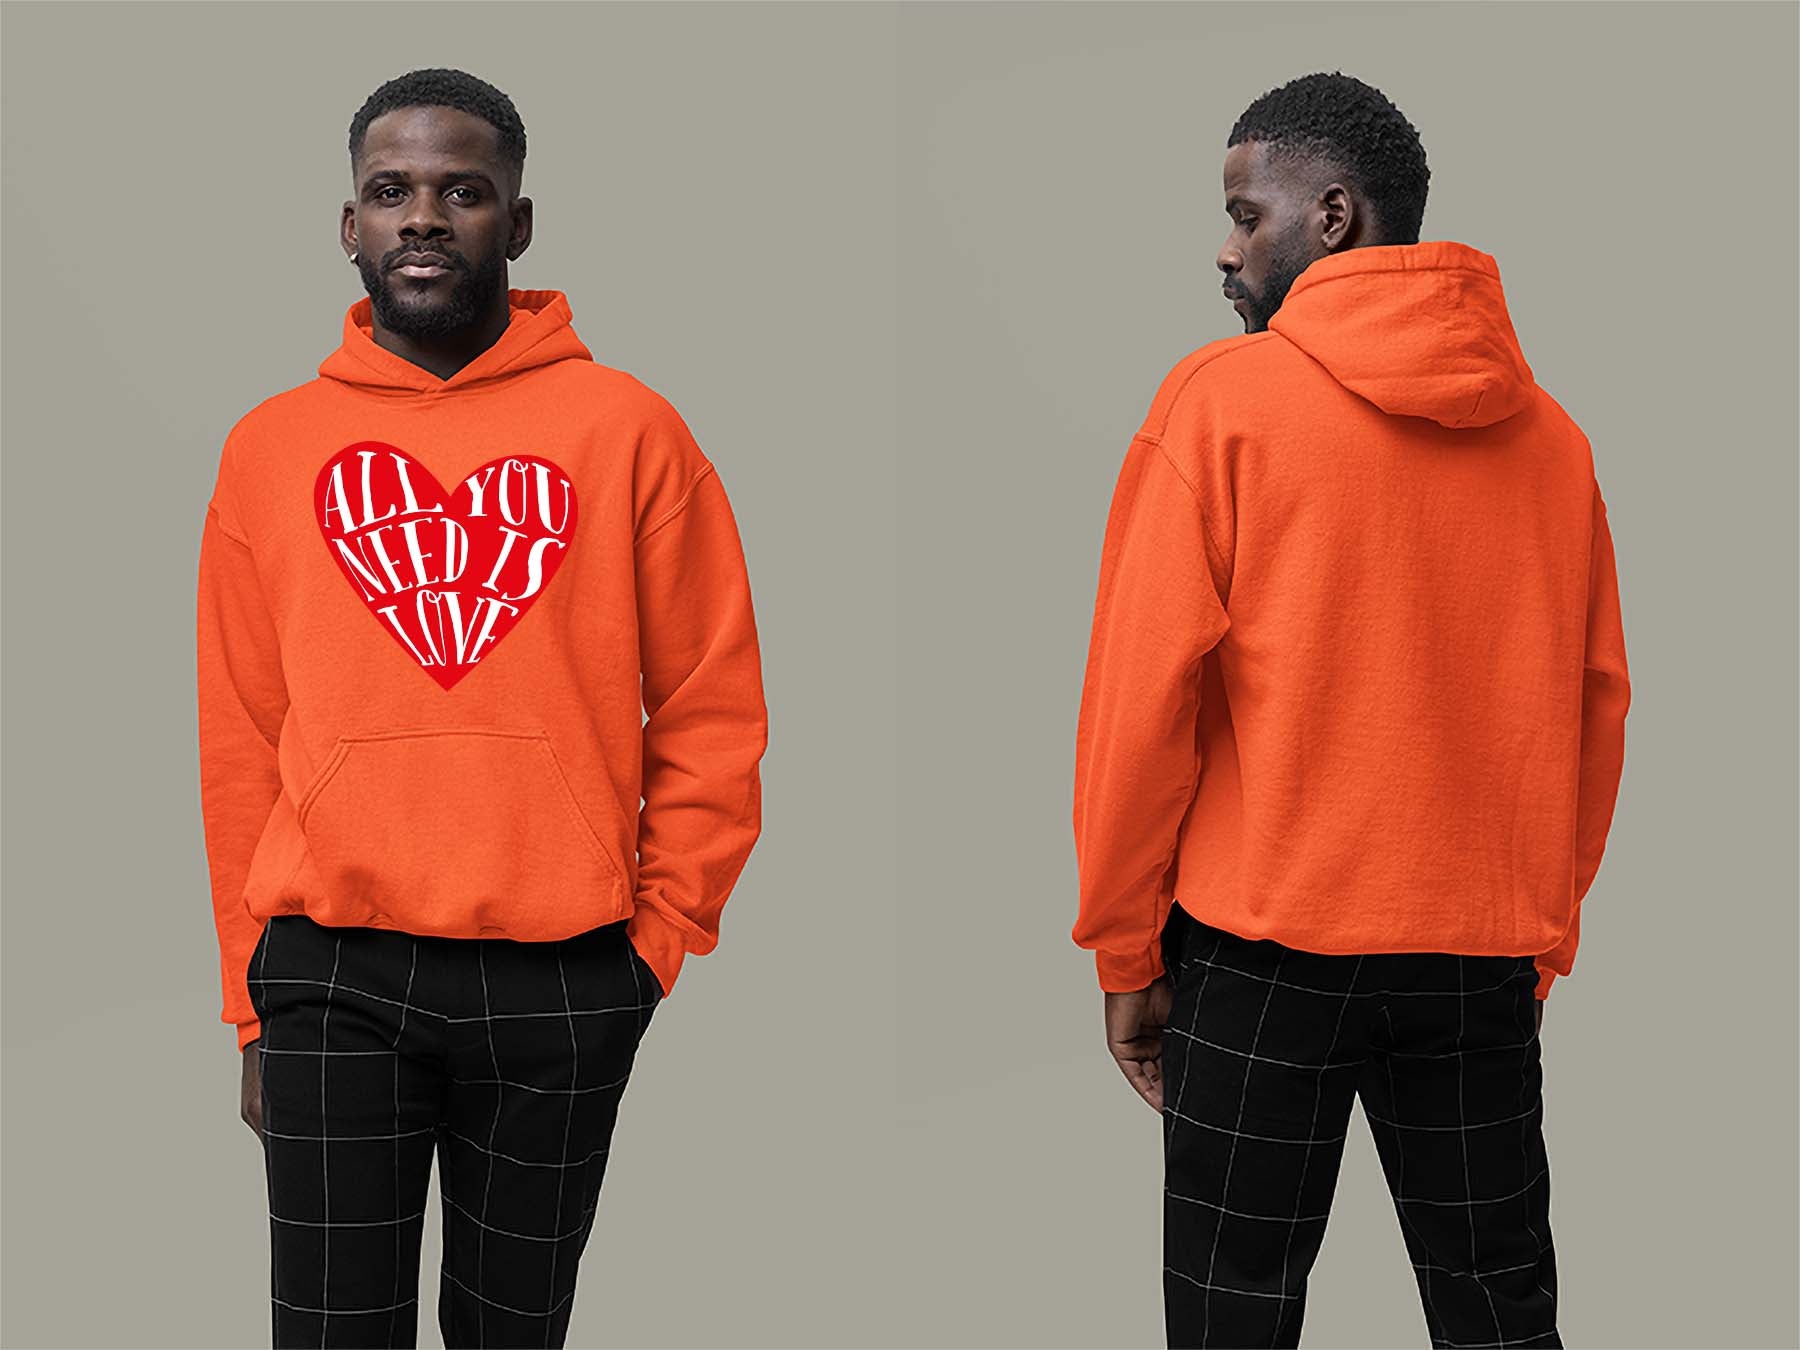 Fat Dave All You Need is Love Hoodie Small Orange